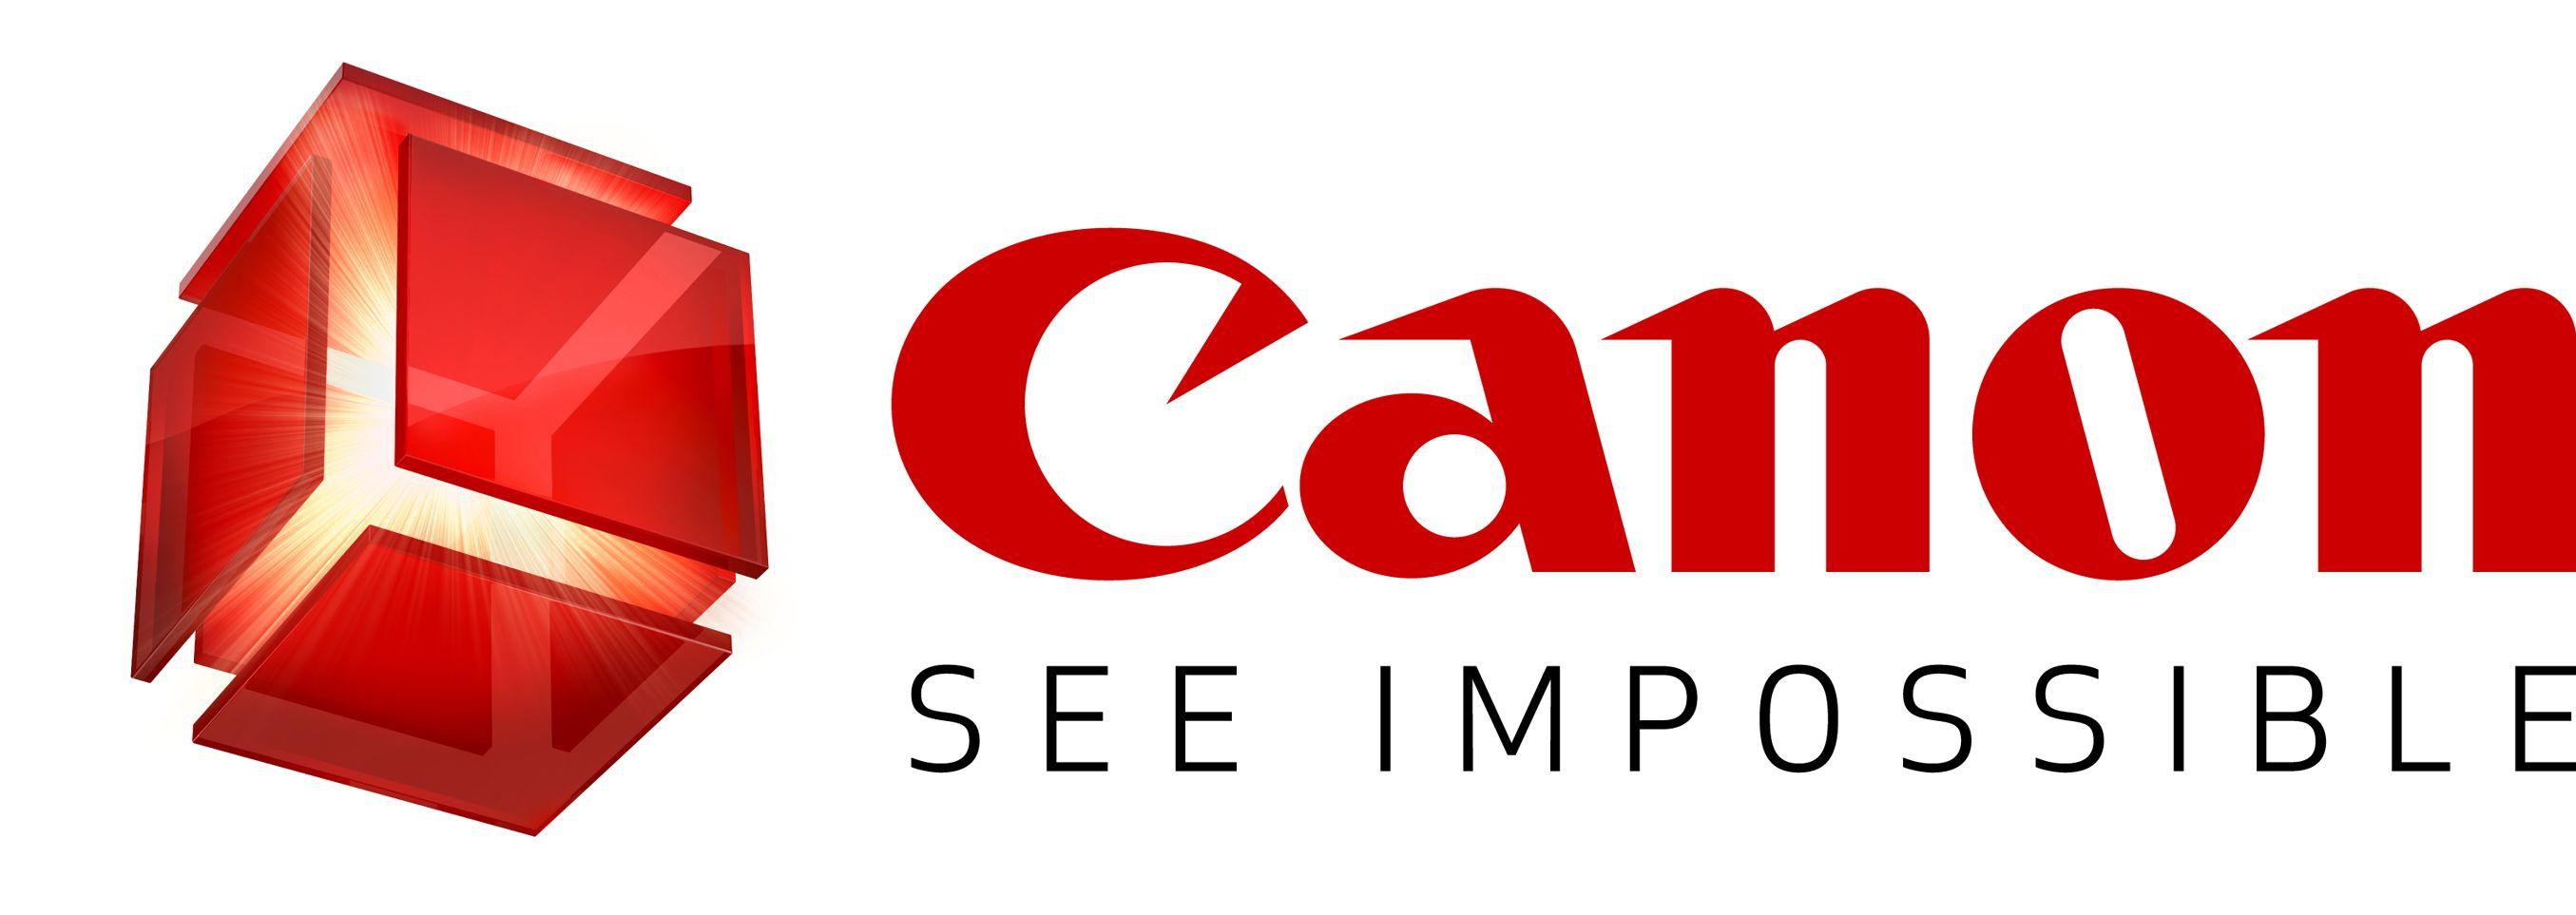 Canon See Impossible Logo - Press Release Details